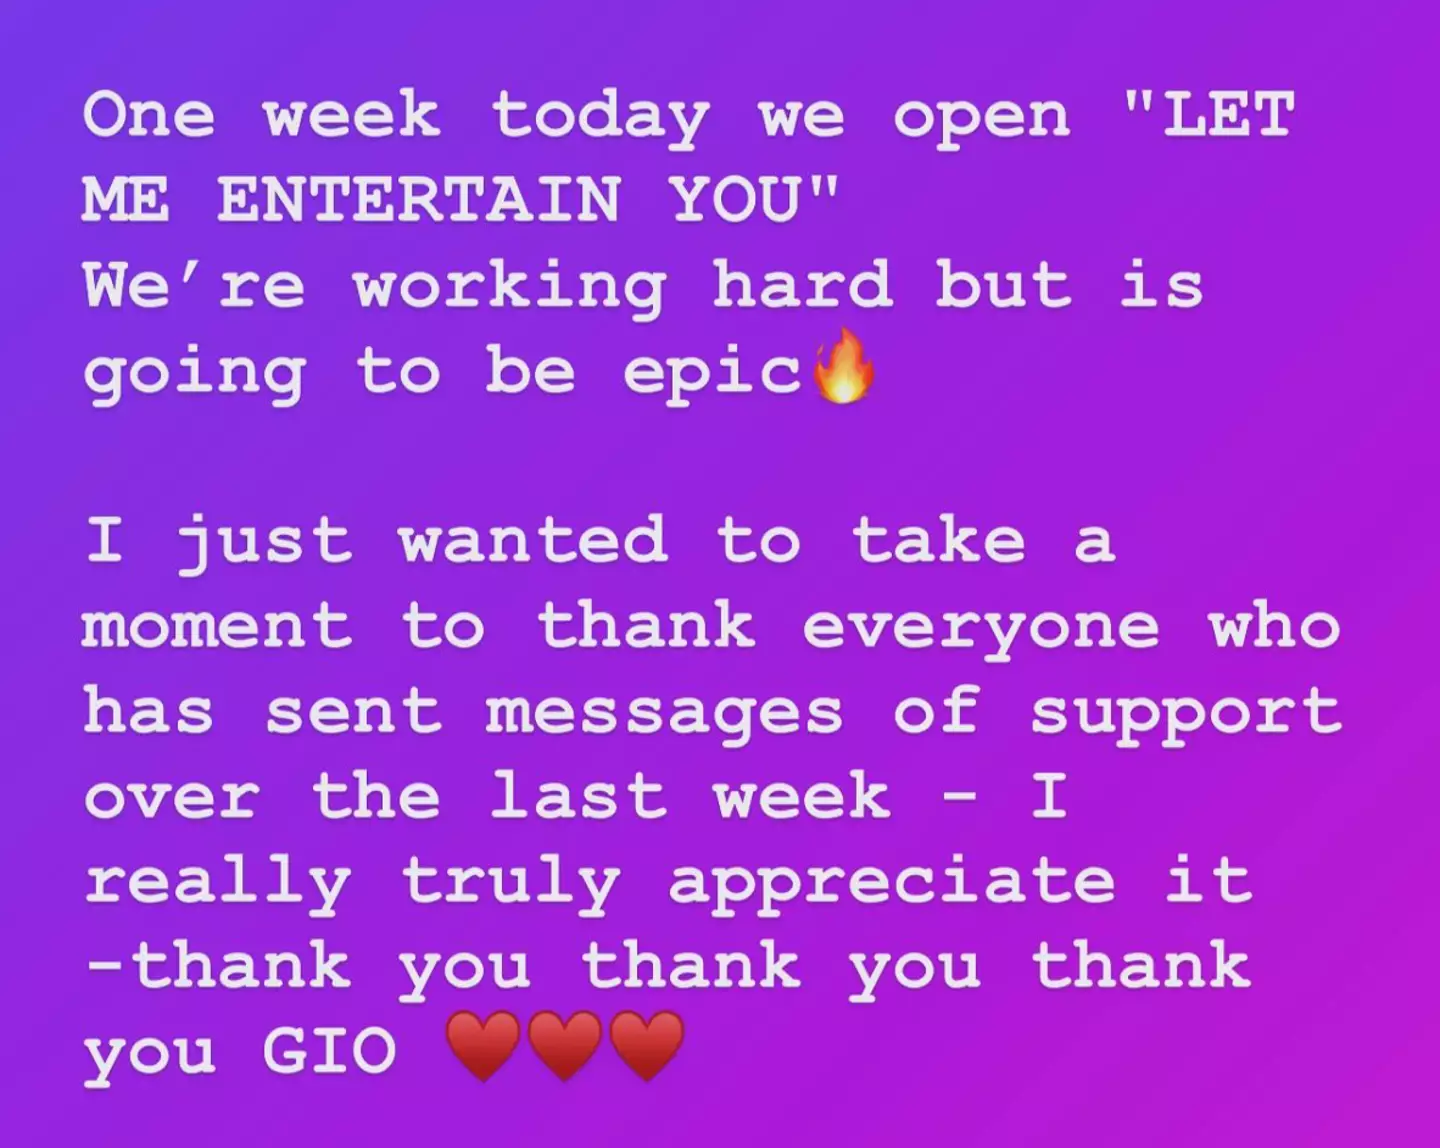 Giovanni thanked his fans in a statement.